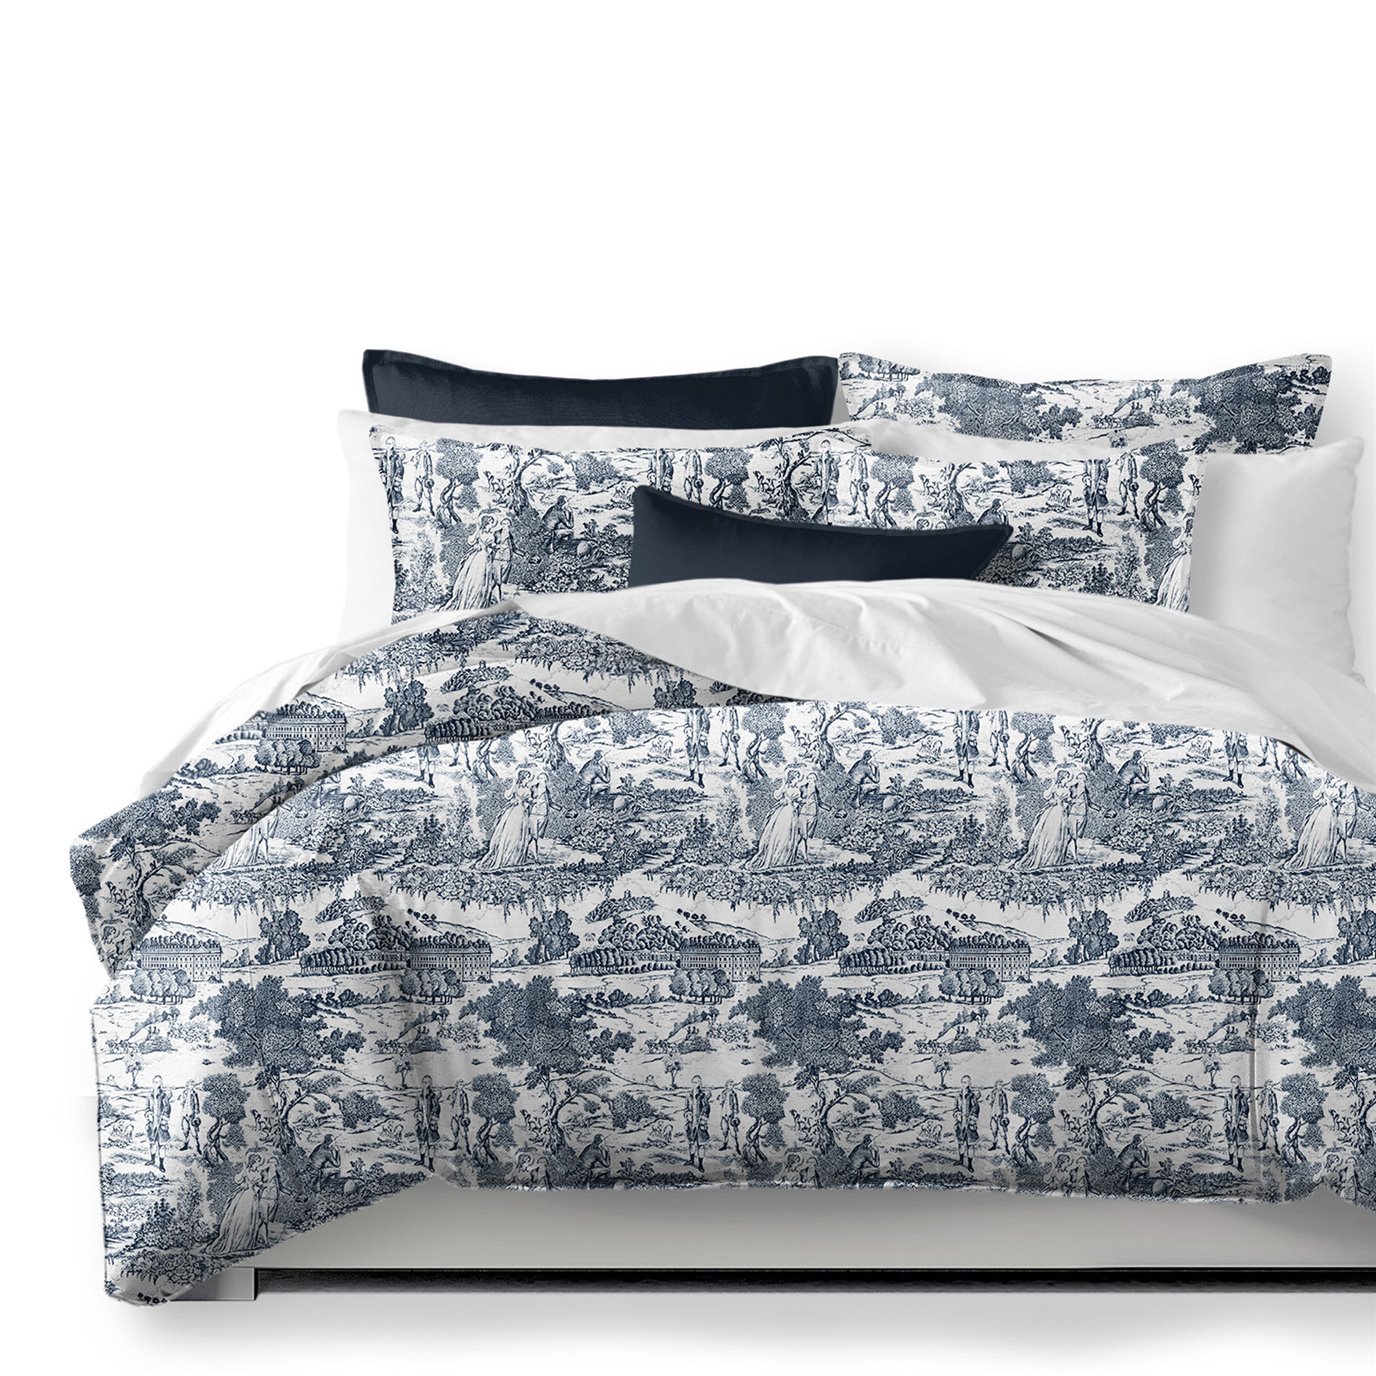 Beau Toile Blue Coverlet and Pillow Sham(s) Set - Size Twin